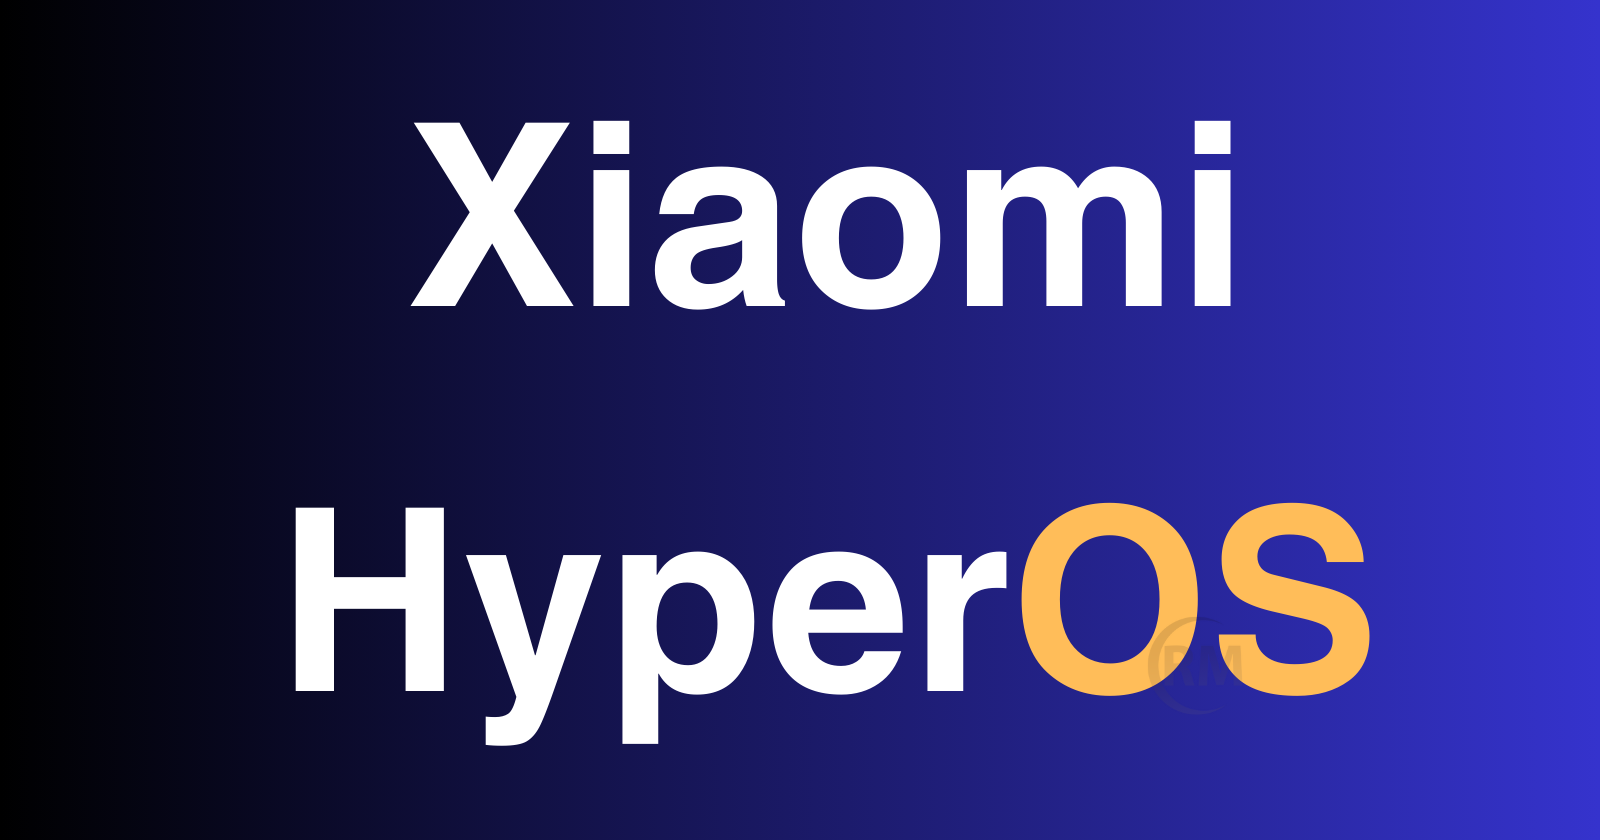 Eligible Xiaomi HyperOS first feature update devices - Real Mi Central